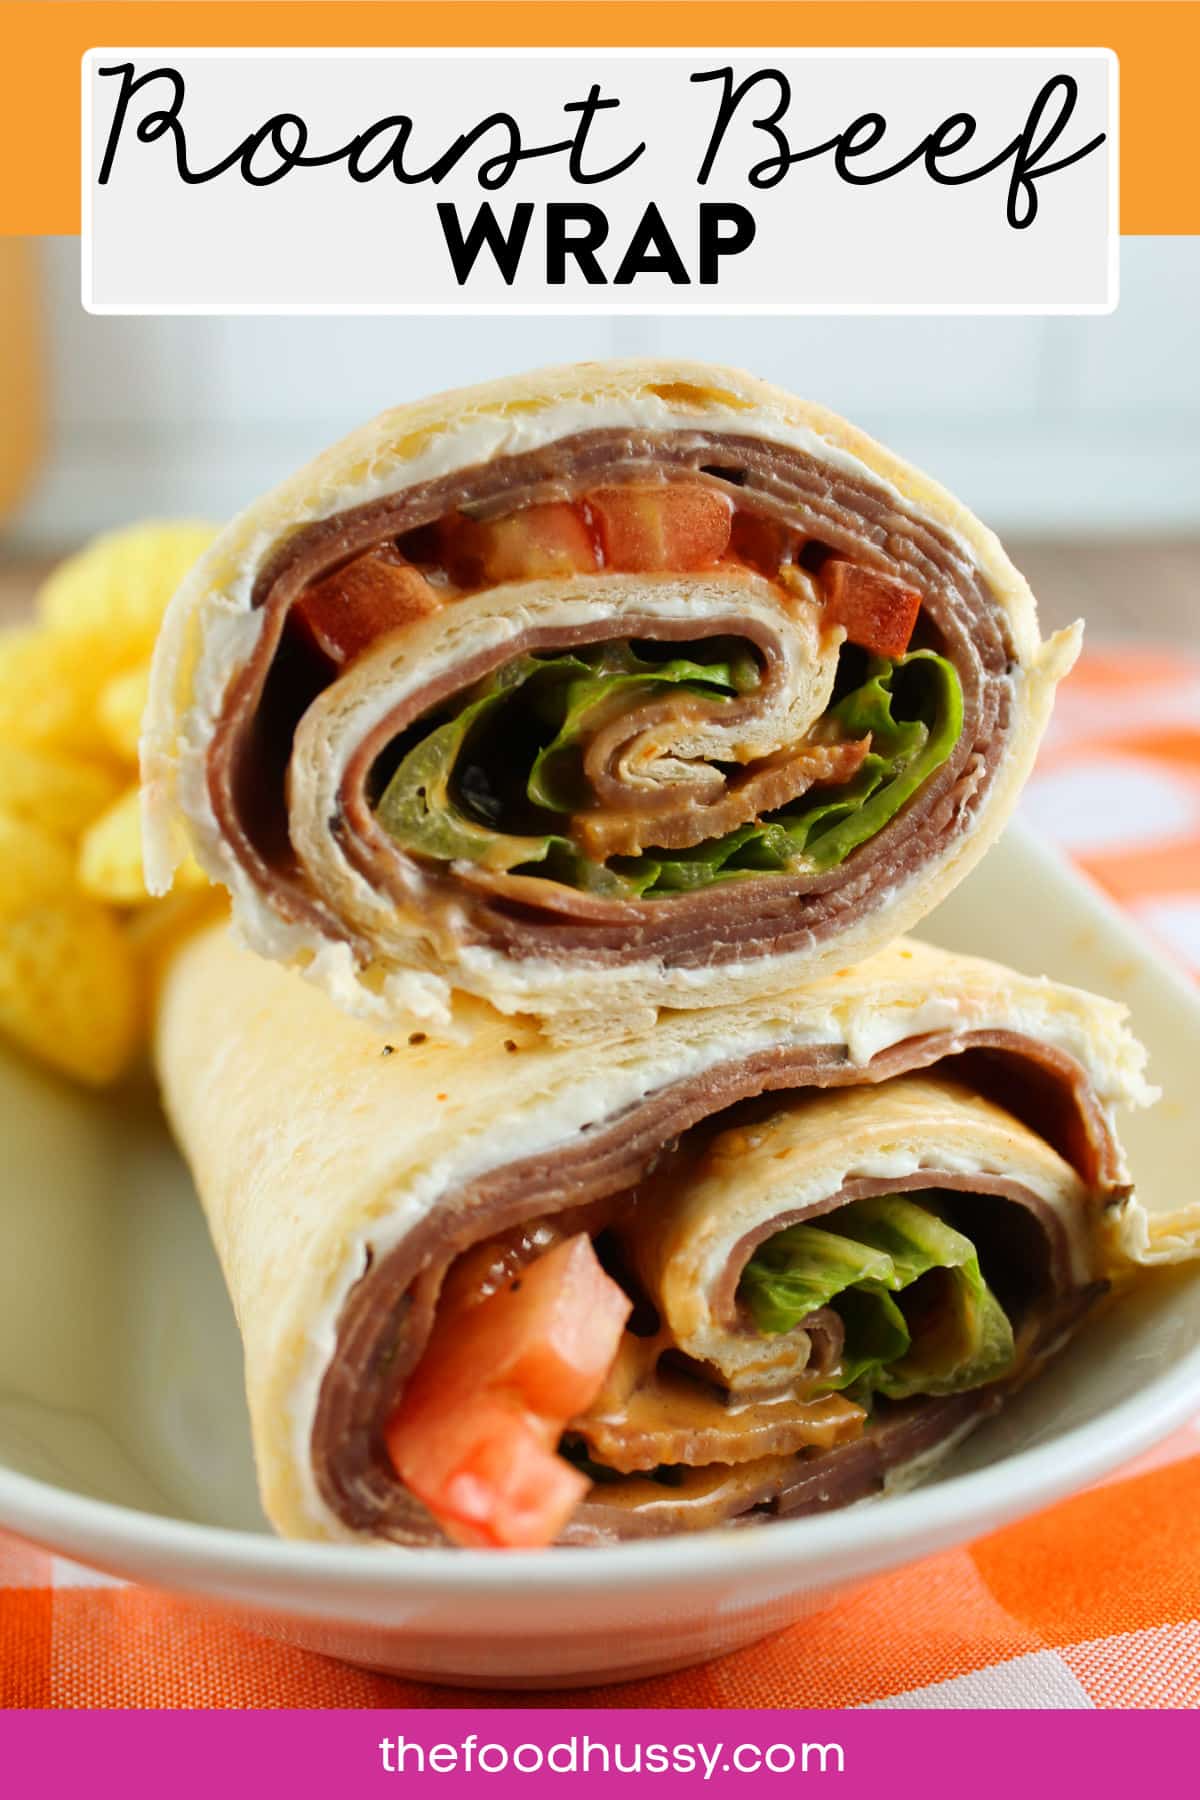 This BLT Roast Beef Wrap is a delicious and easy-to-make lunch. It's filled with slices of roast beef, cream cheese, bacon, lettuce, tomatoes and BBQ ranch dressing. Crunchy, cool and meaty! So tasty! via @foodhussy